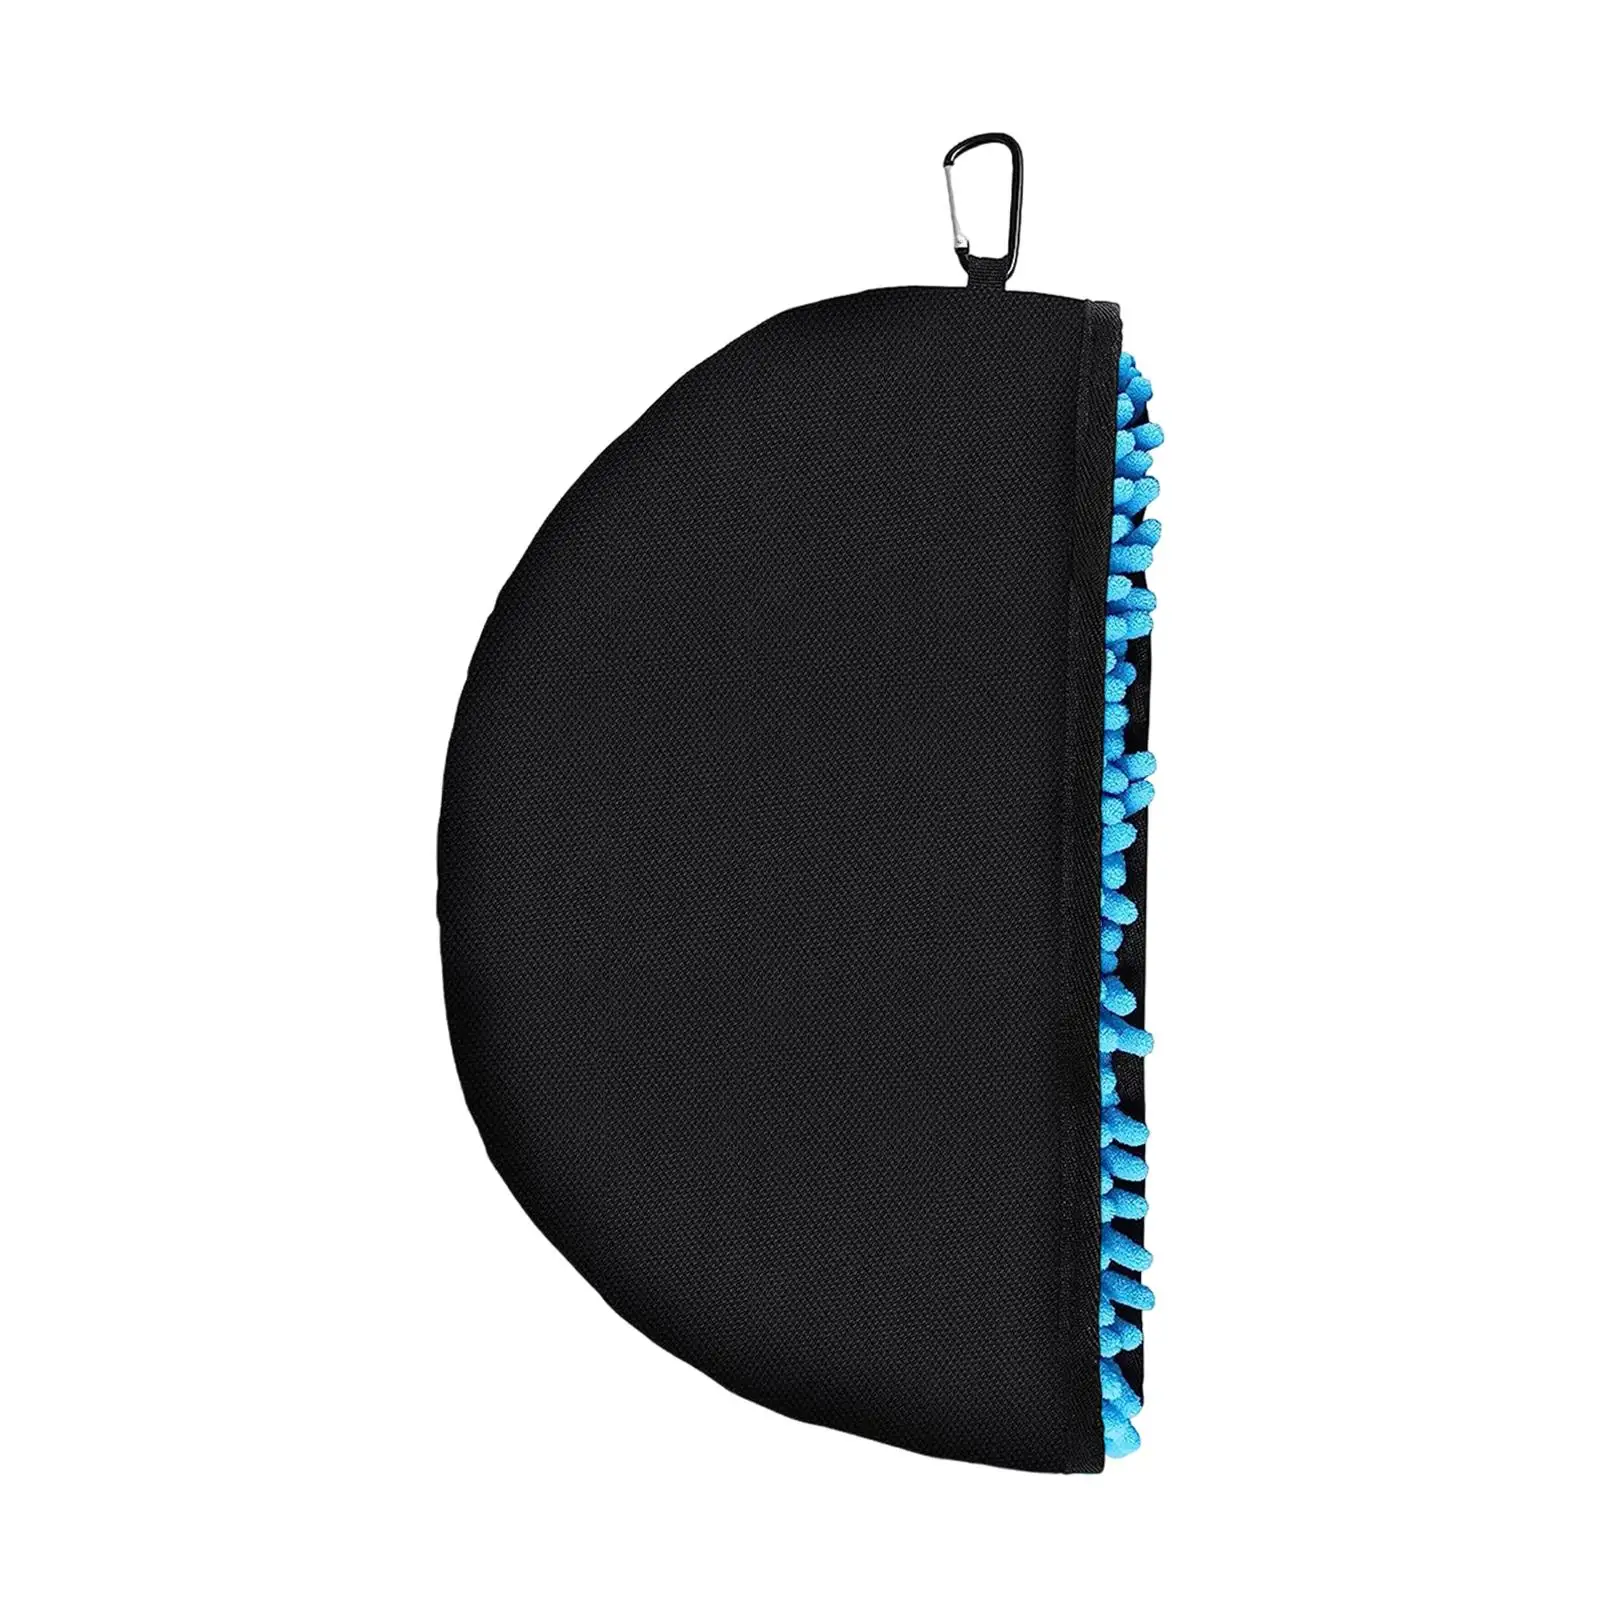 Disc Golf Cleaning Tool Indoor Outdoor Tote Target Accessories Cleaner Cleaning Towel Case with Metal Clip for Beginner Outdoor